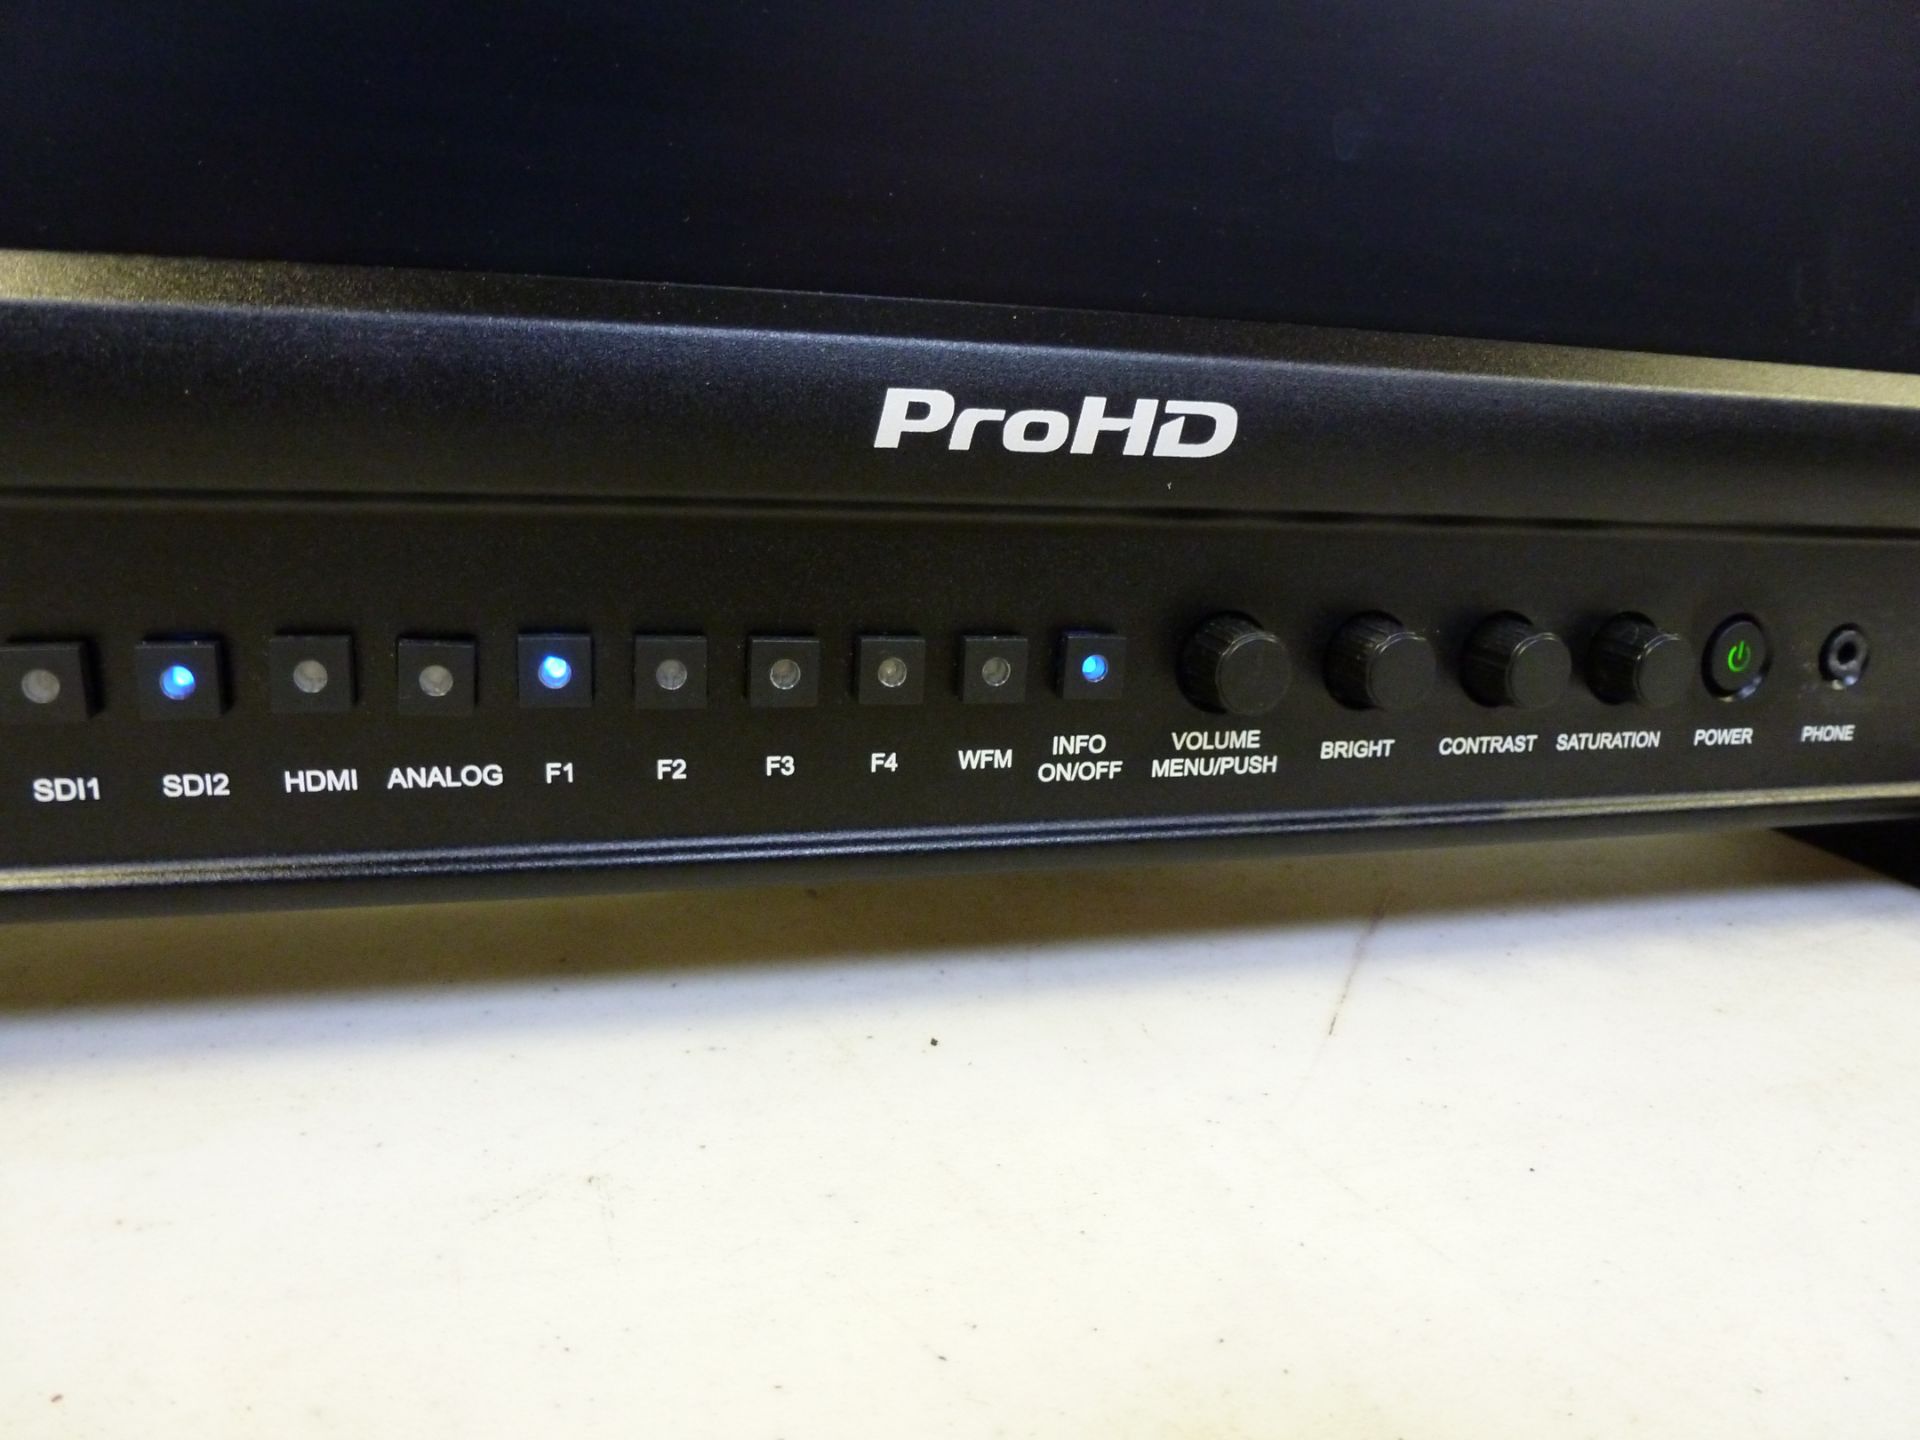 Pro HD 24" Broadcast Panel Studio LCD Monitor, Model DT-N24F, S/n 00090779. Comes with Power - Image 3 of 8